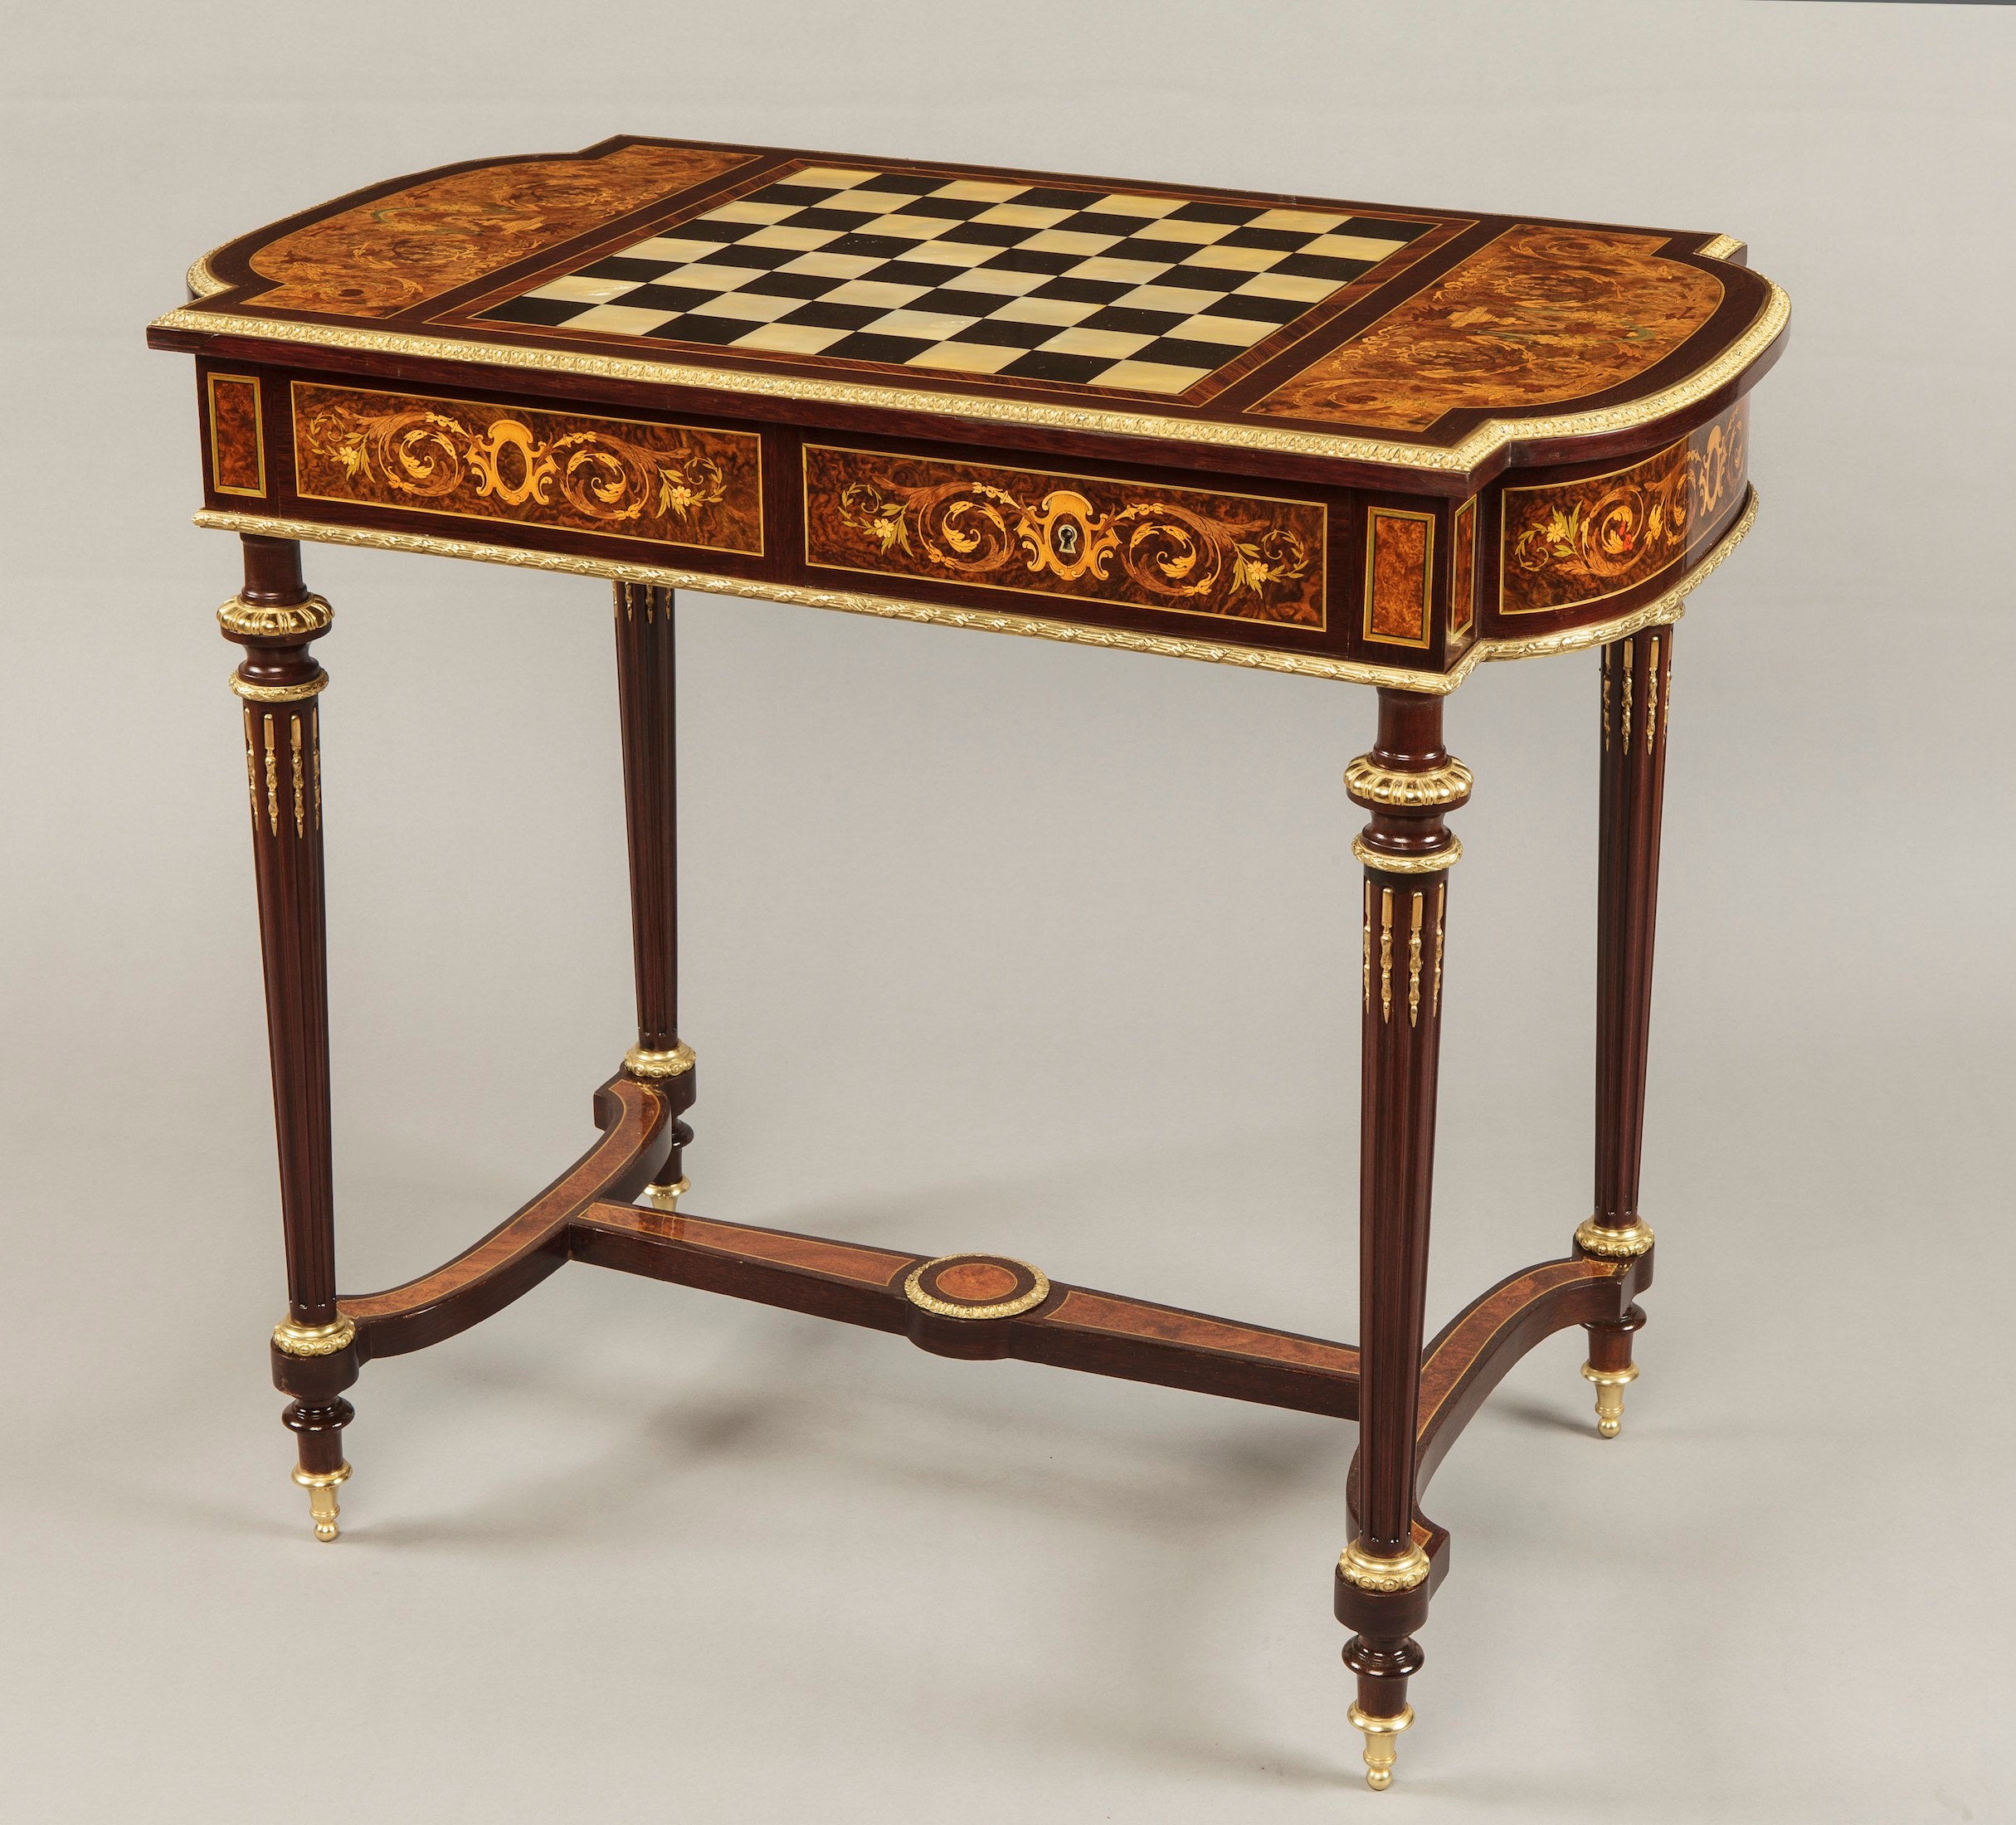 An Attractive Antique Games Table of the Napoleon IIIrd Period